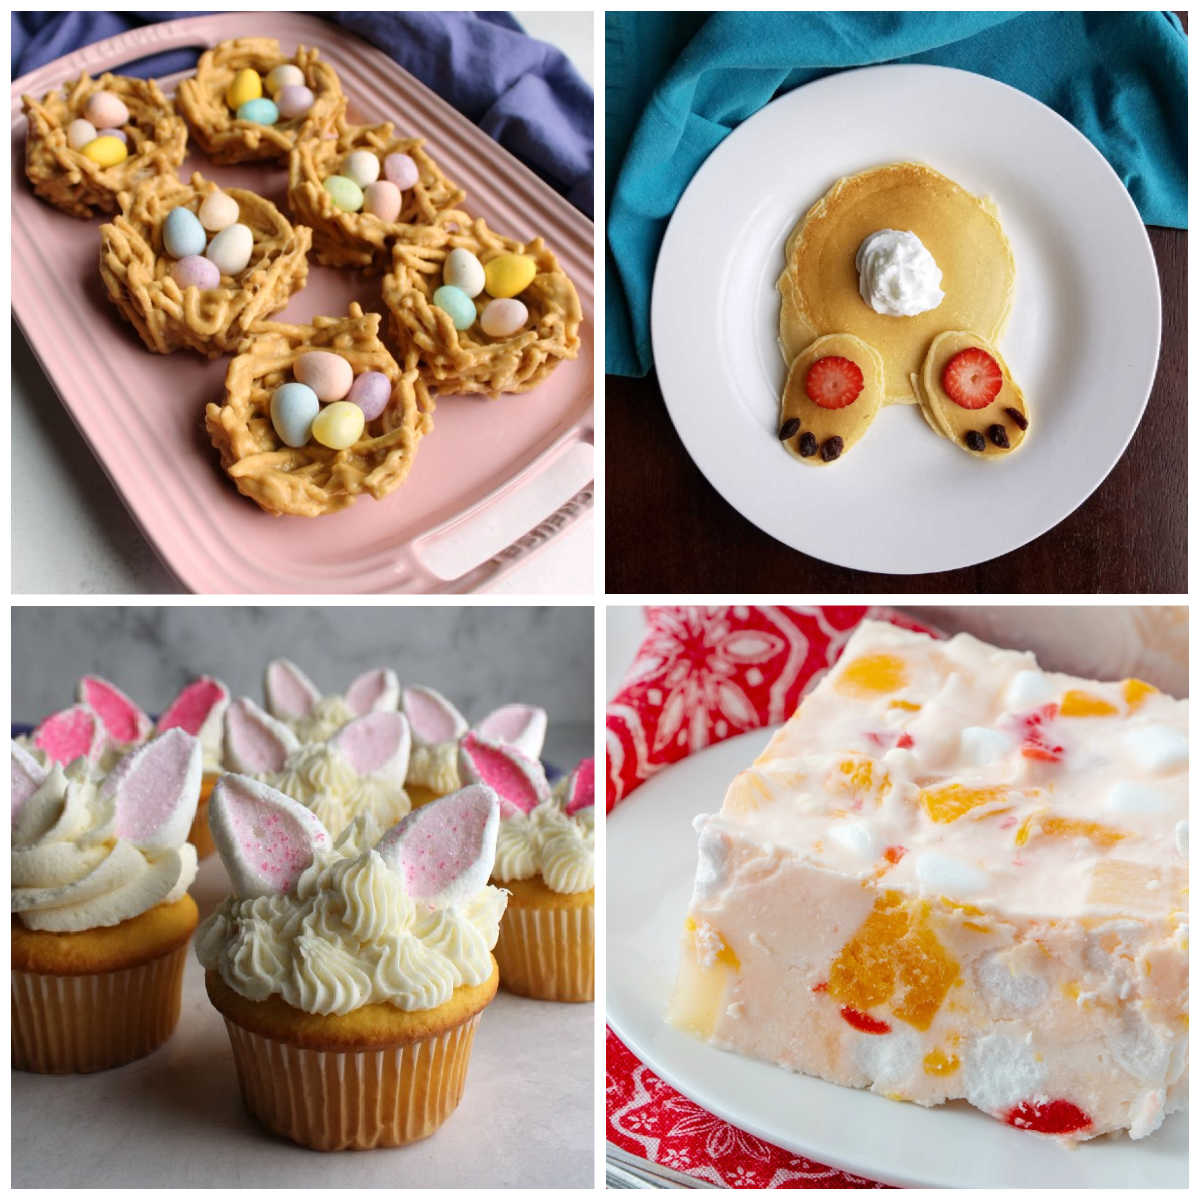 Collage of images showing Easter recipes from bunny butt pancakes to bunny ear cupcakes plus edible nests and frozen fruit salad.